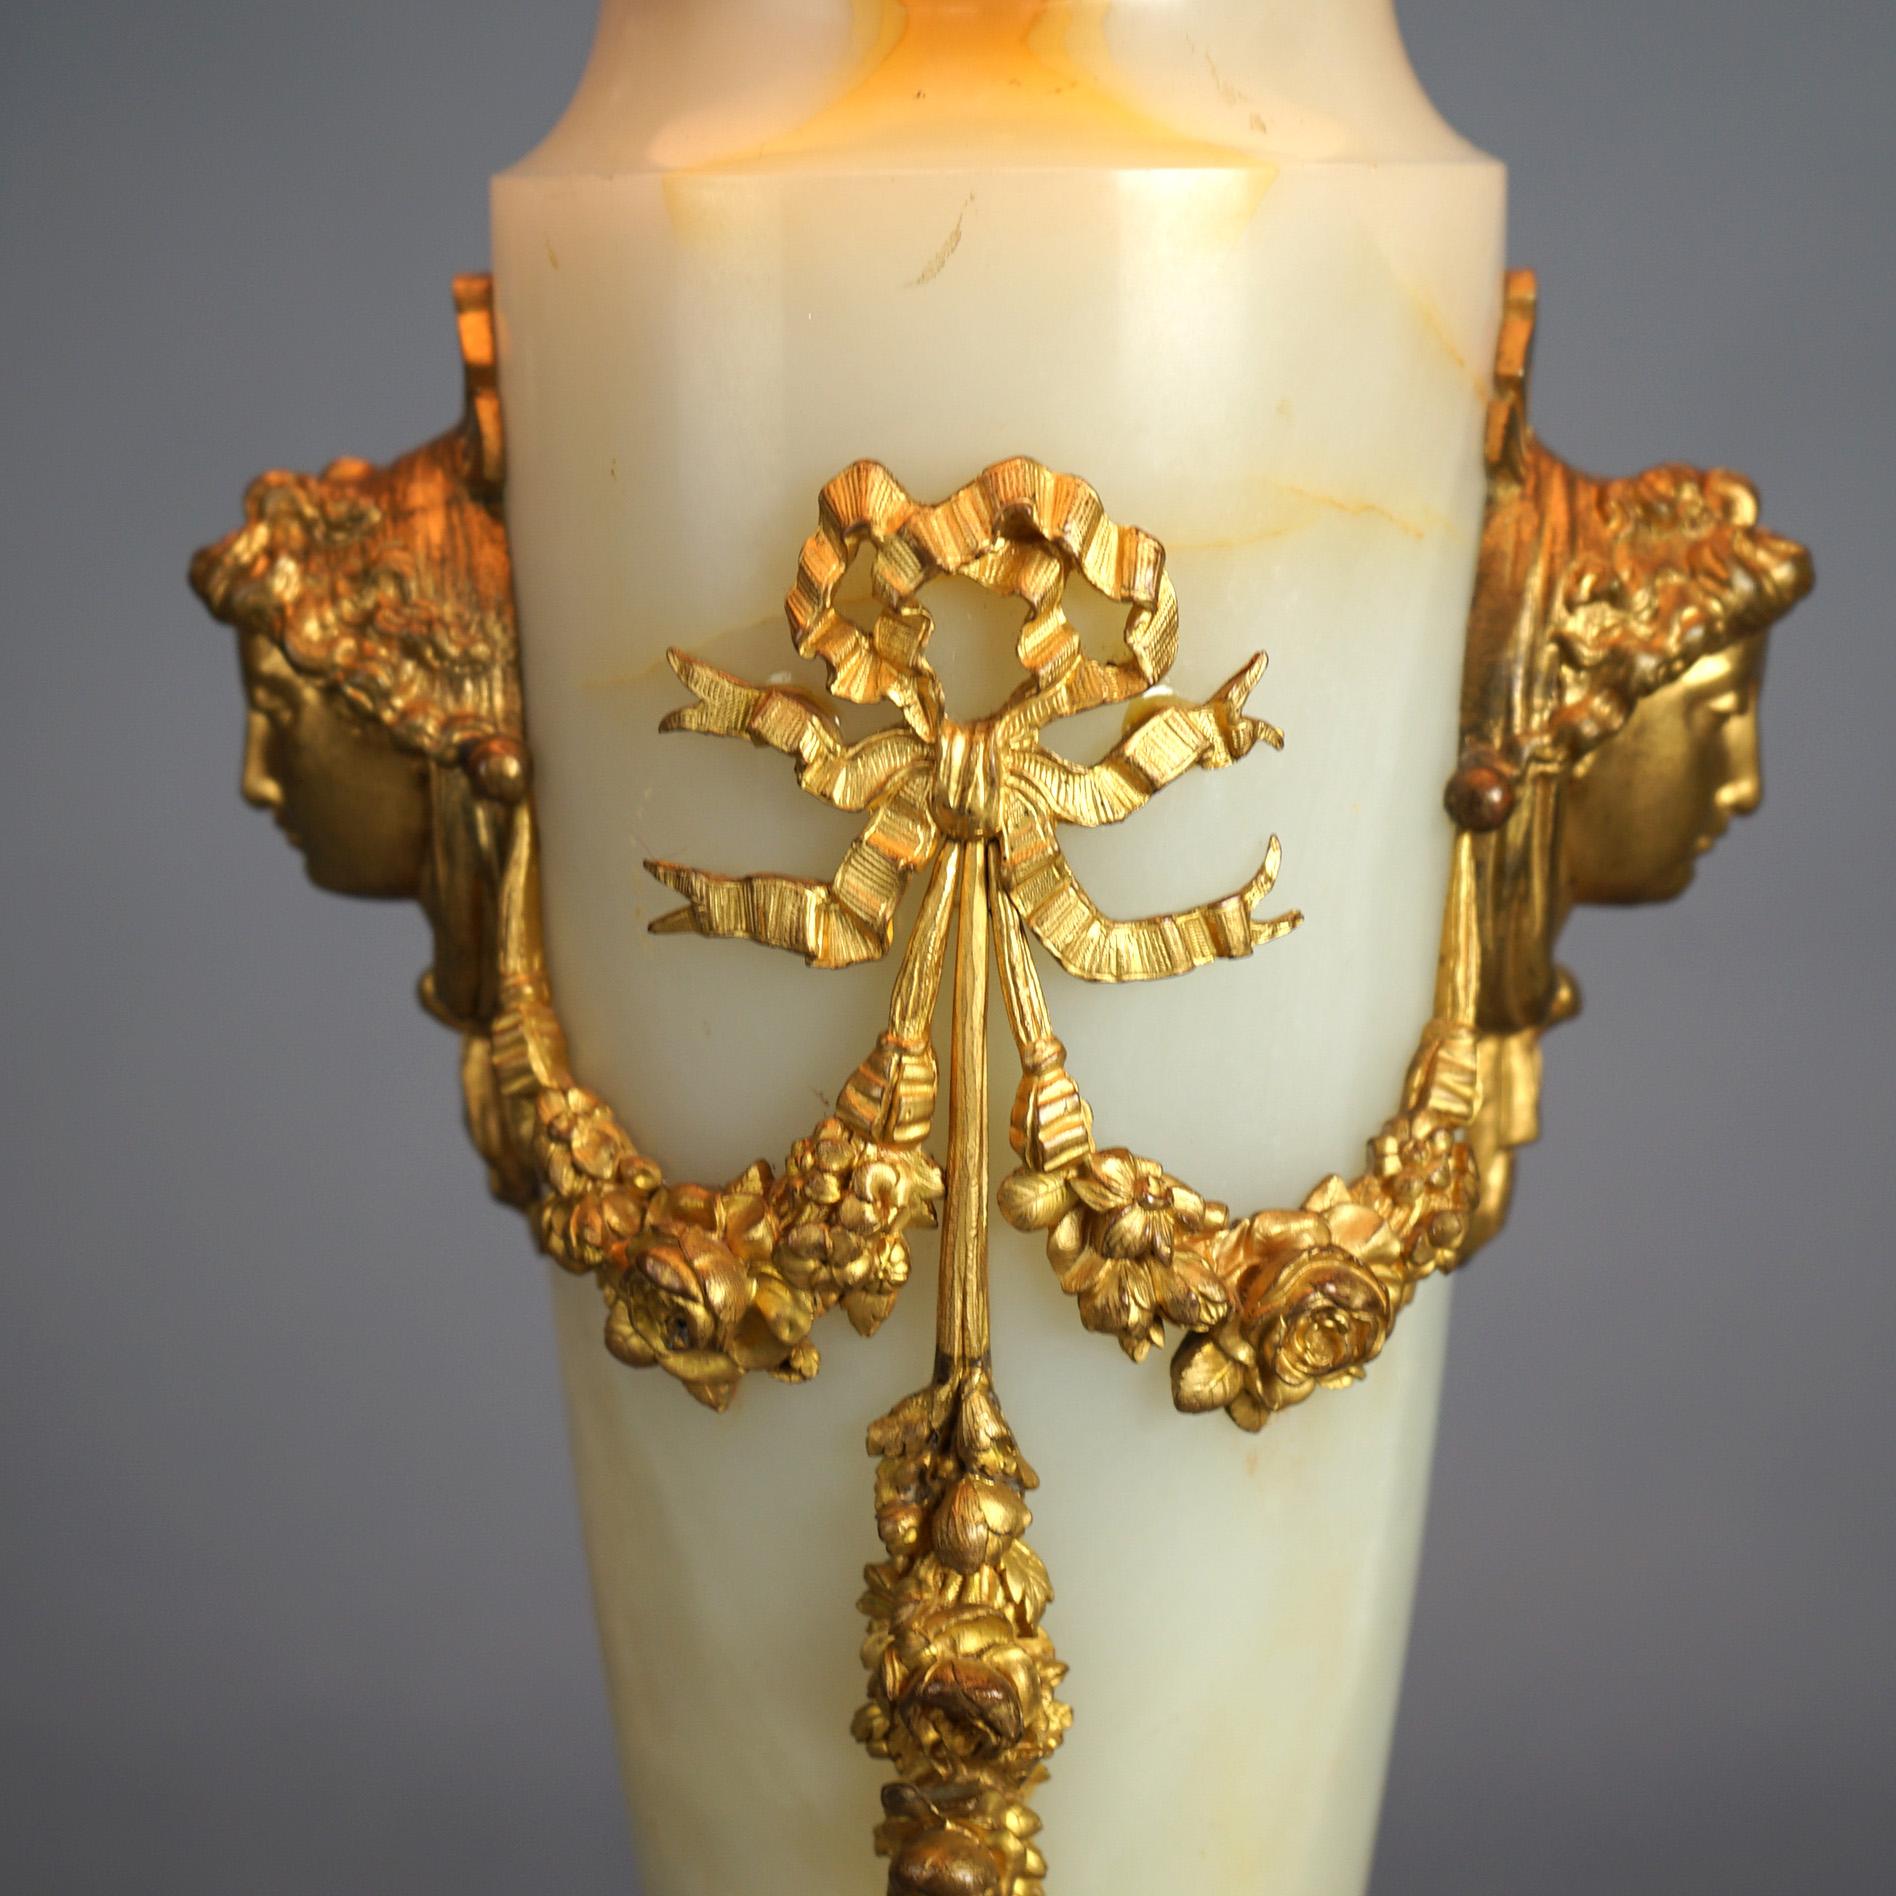 Antique French Onyx, Ormolu & Champleve Enameled Table Lamp Circa 1920 8